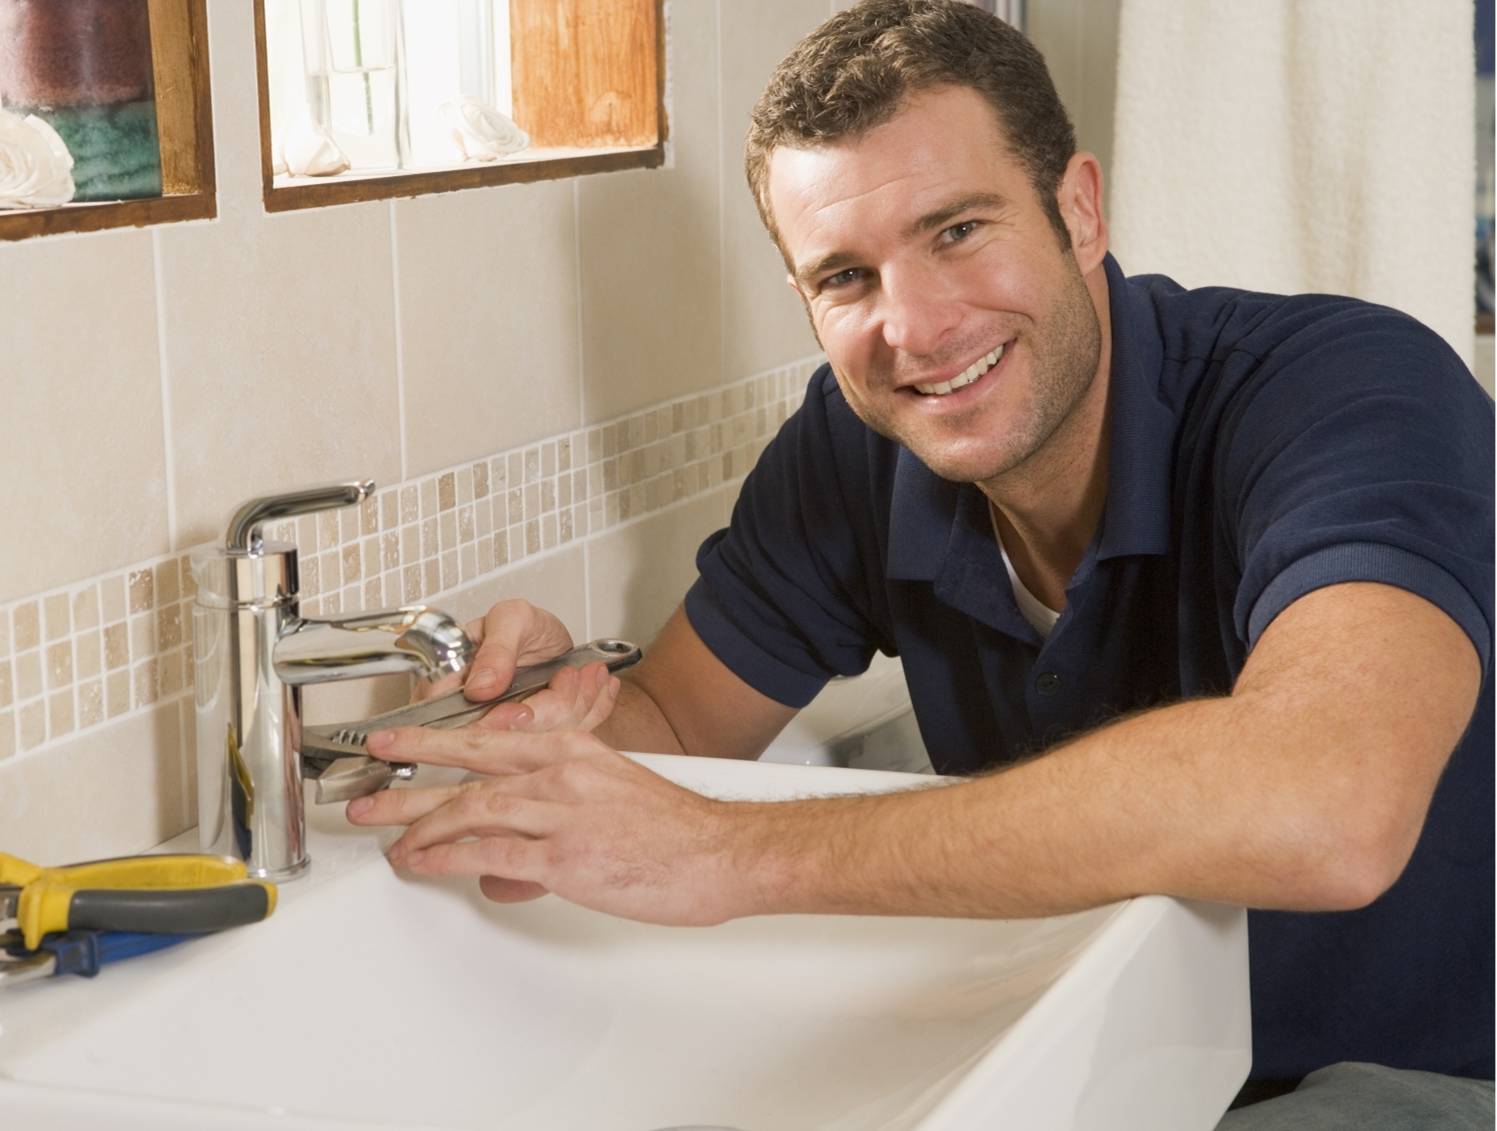 New Jersey plumber installer license prep class download the new version for ipod